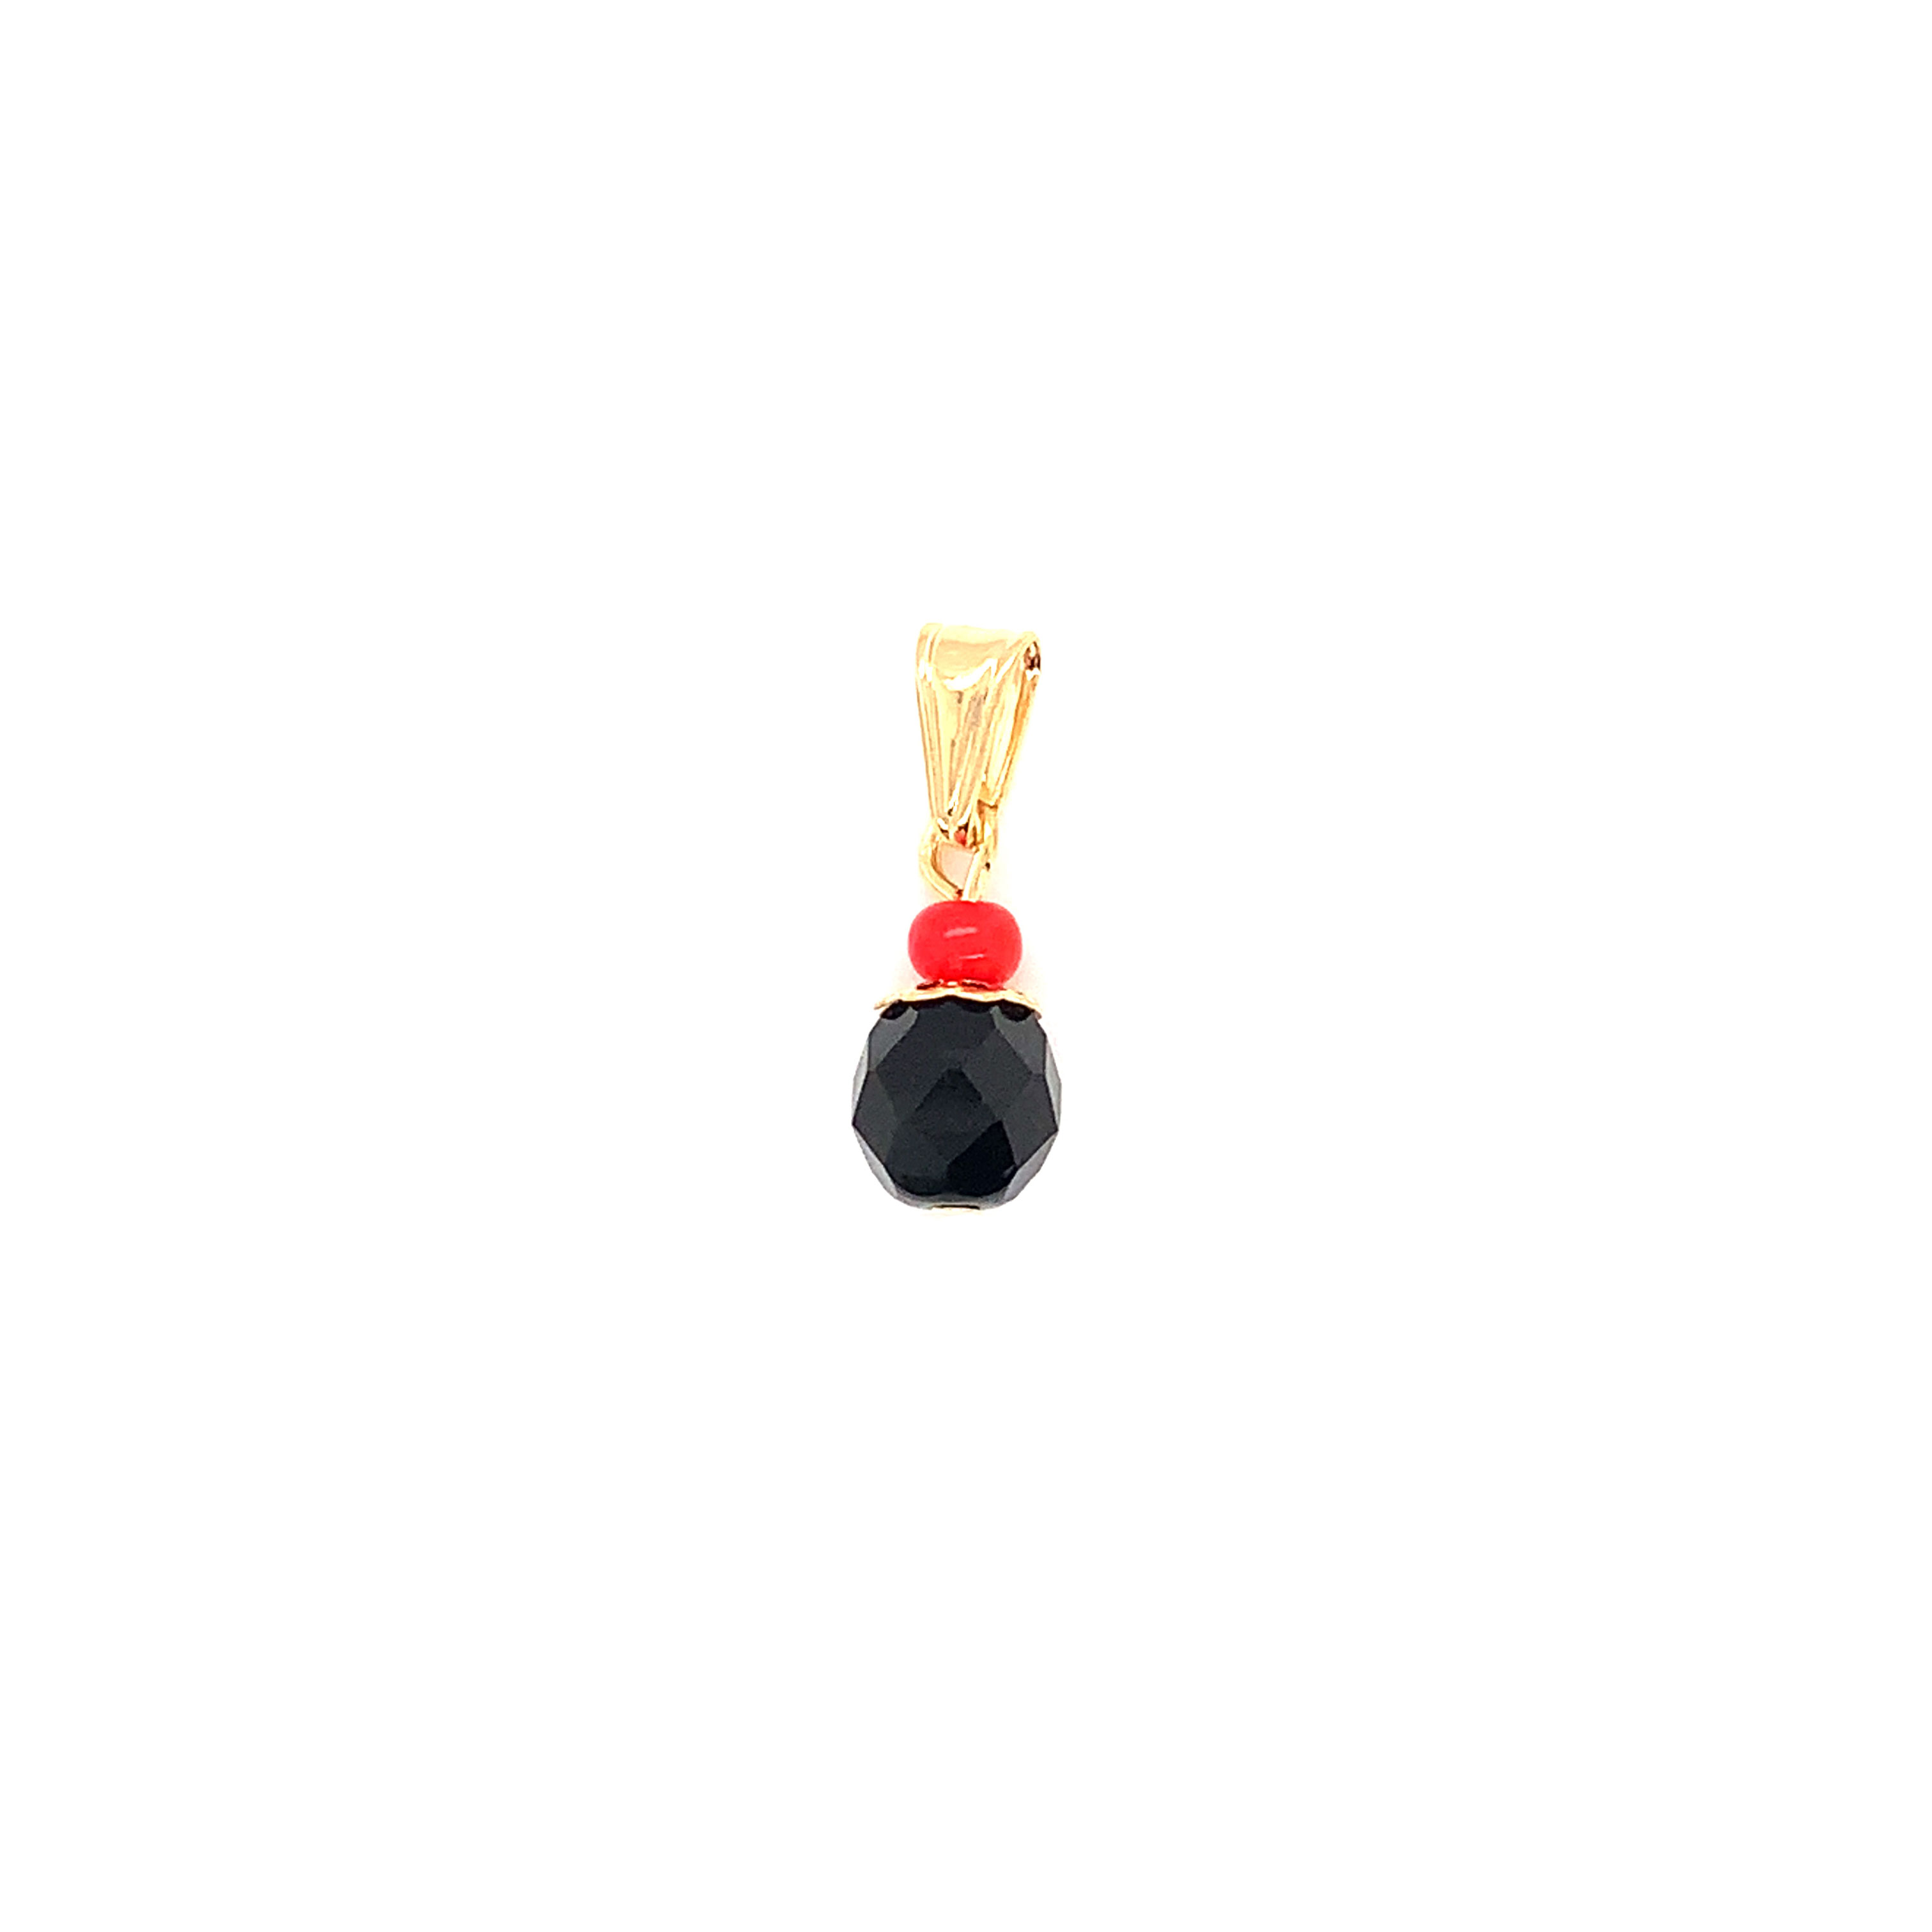 8mm Crystal Azabache Pendant - Gold Filled